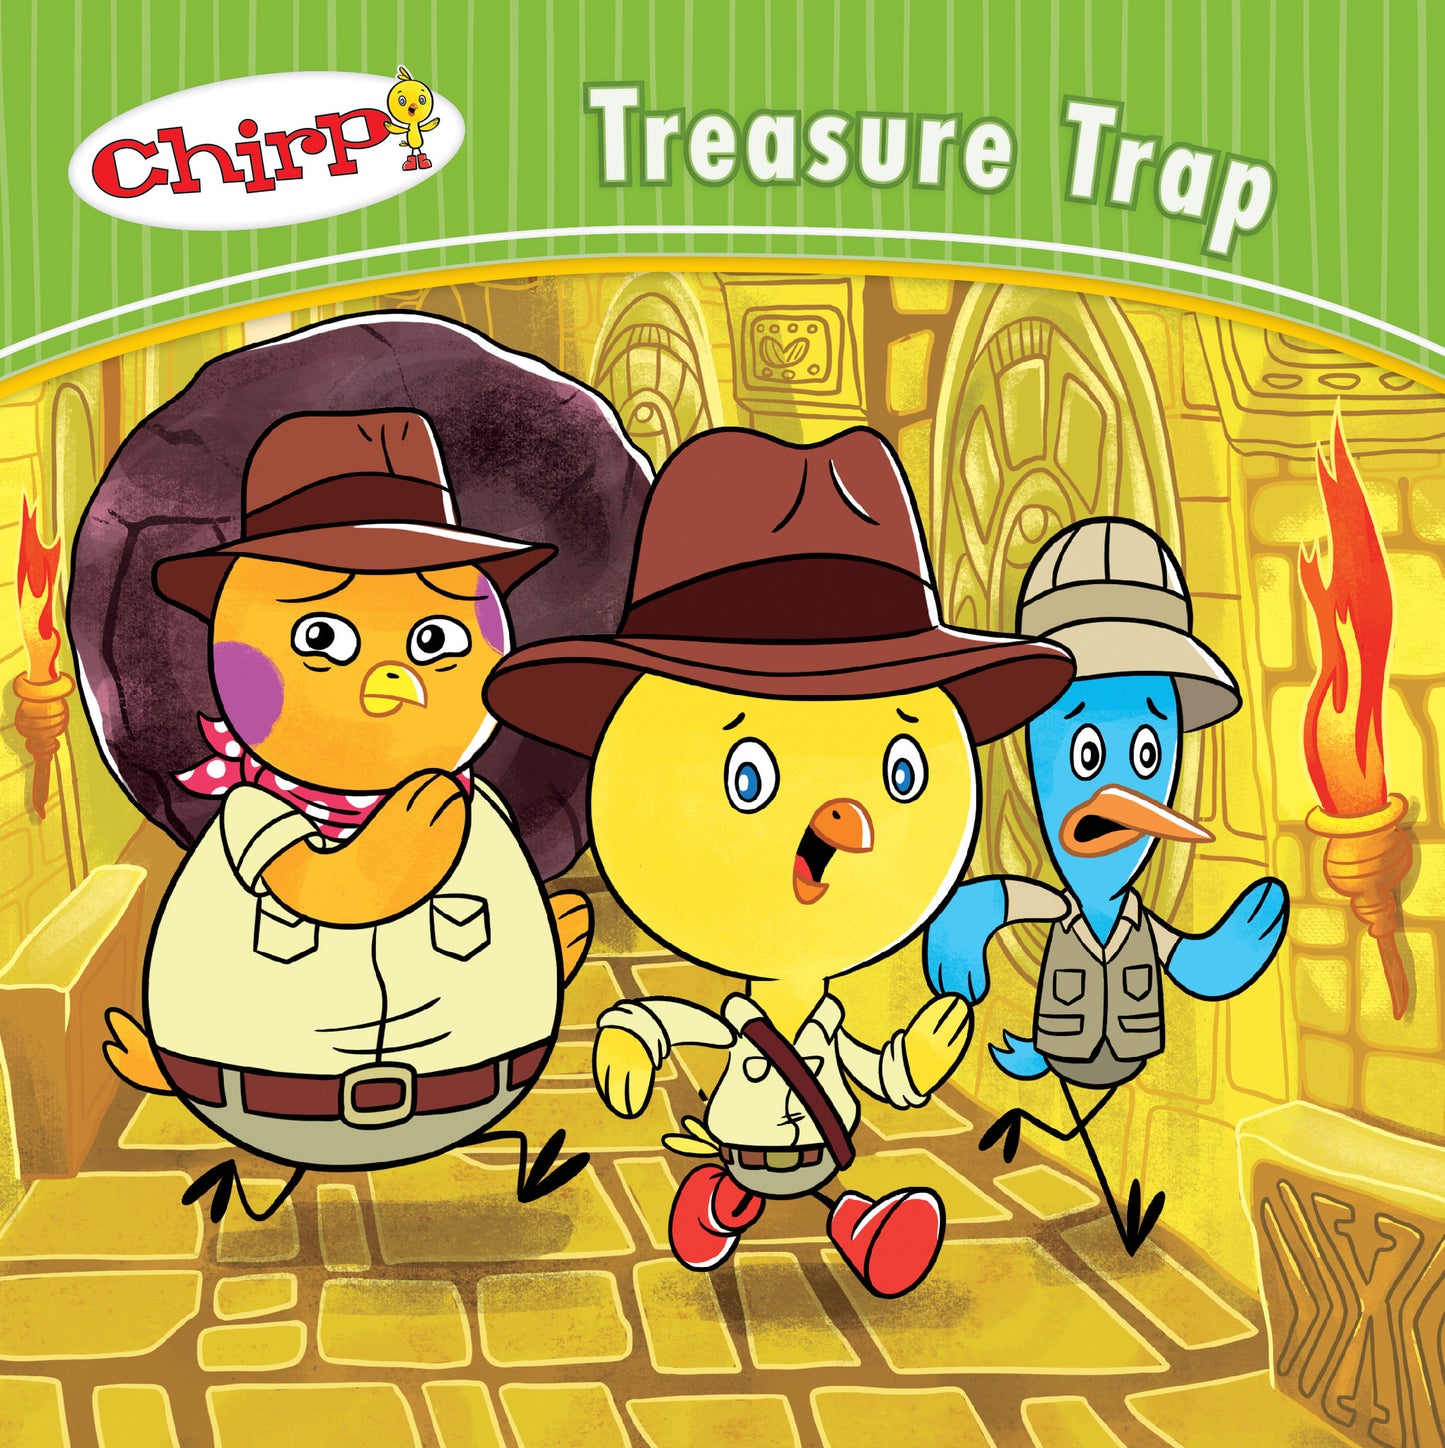 Chirp: Treasure Trap - Owlkids - Reading for kids and literacy resources for parents made fun. Books helping kids to learn.